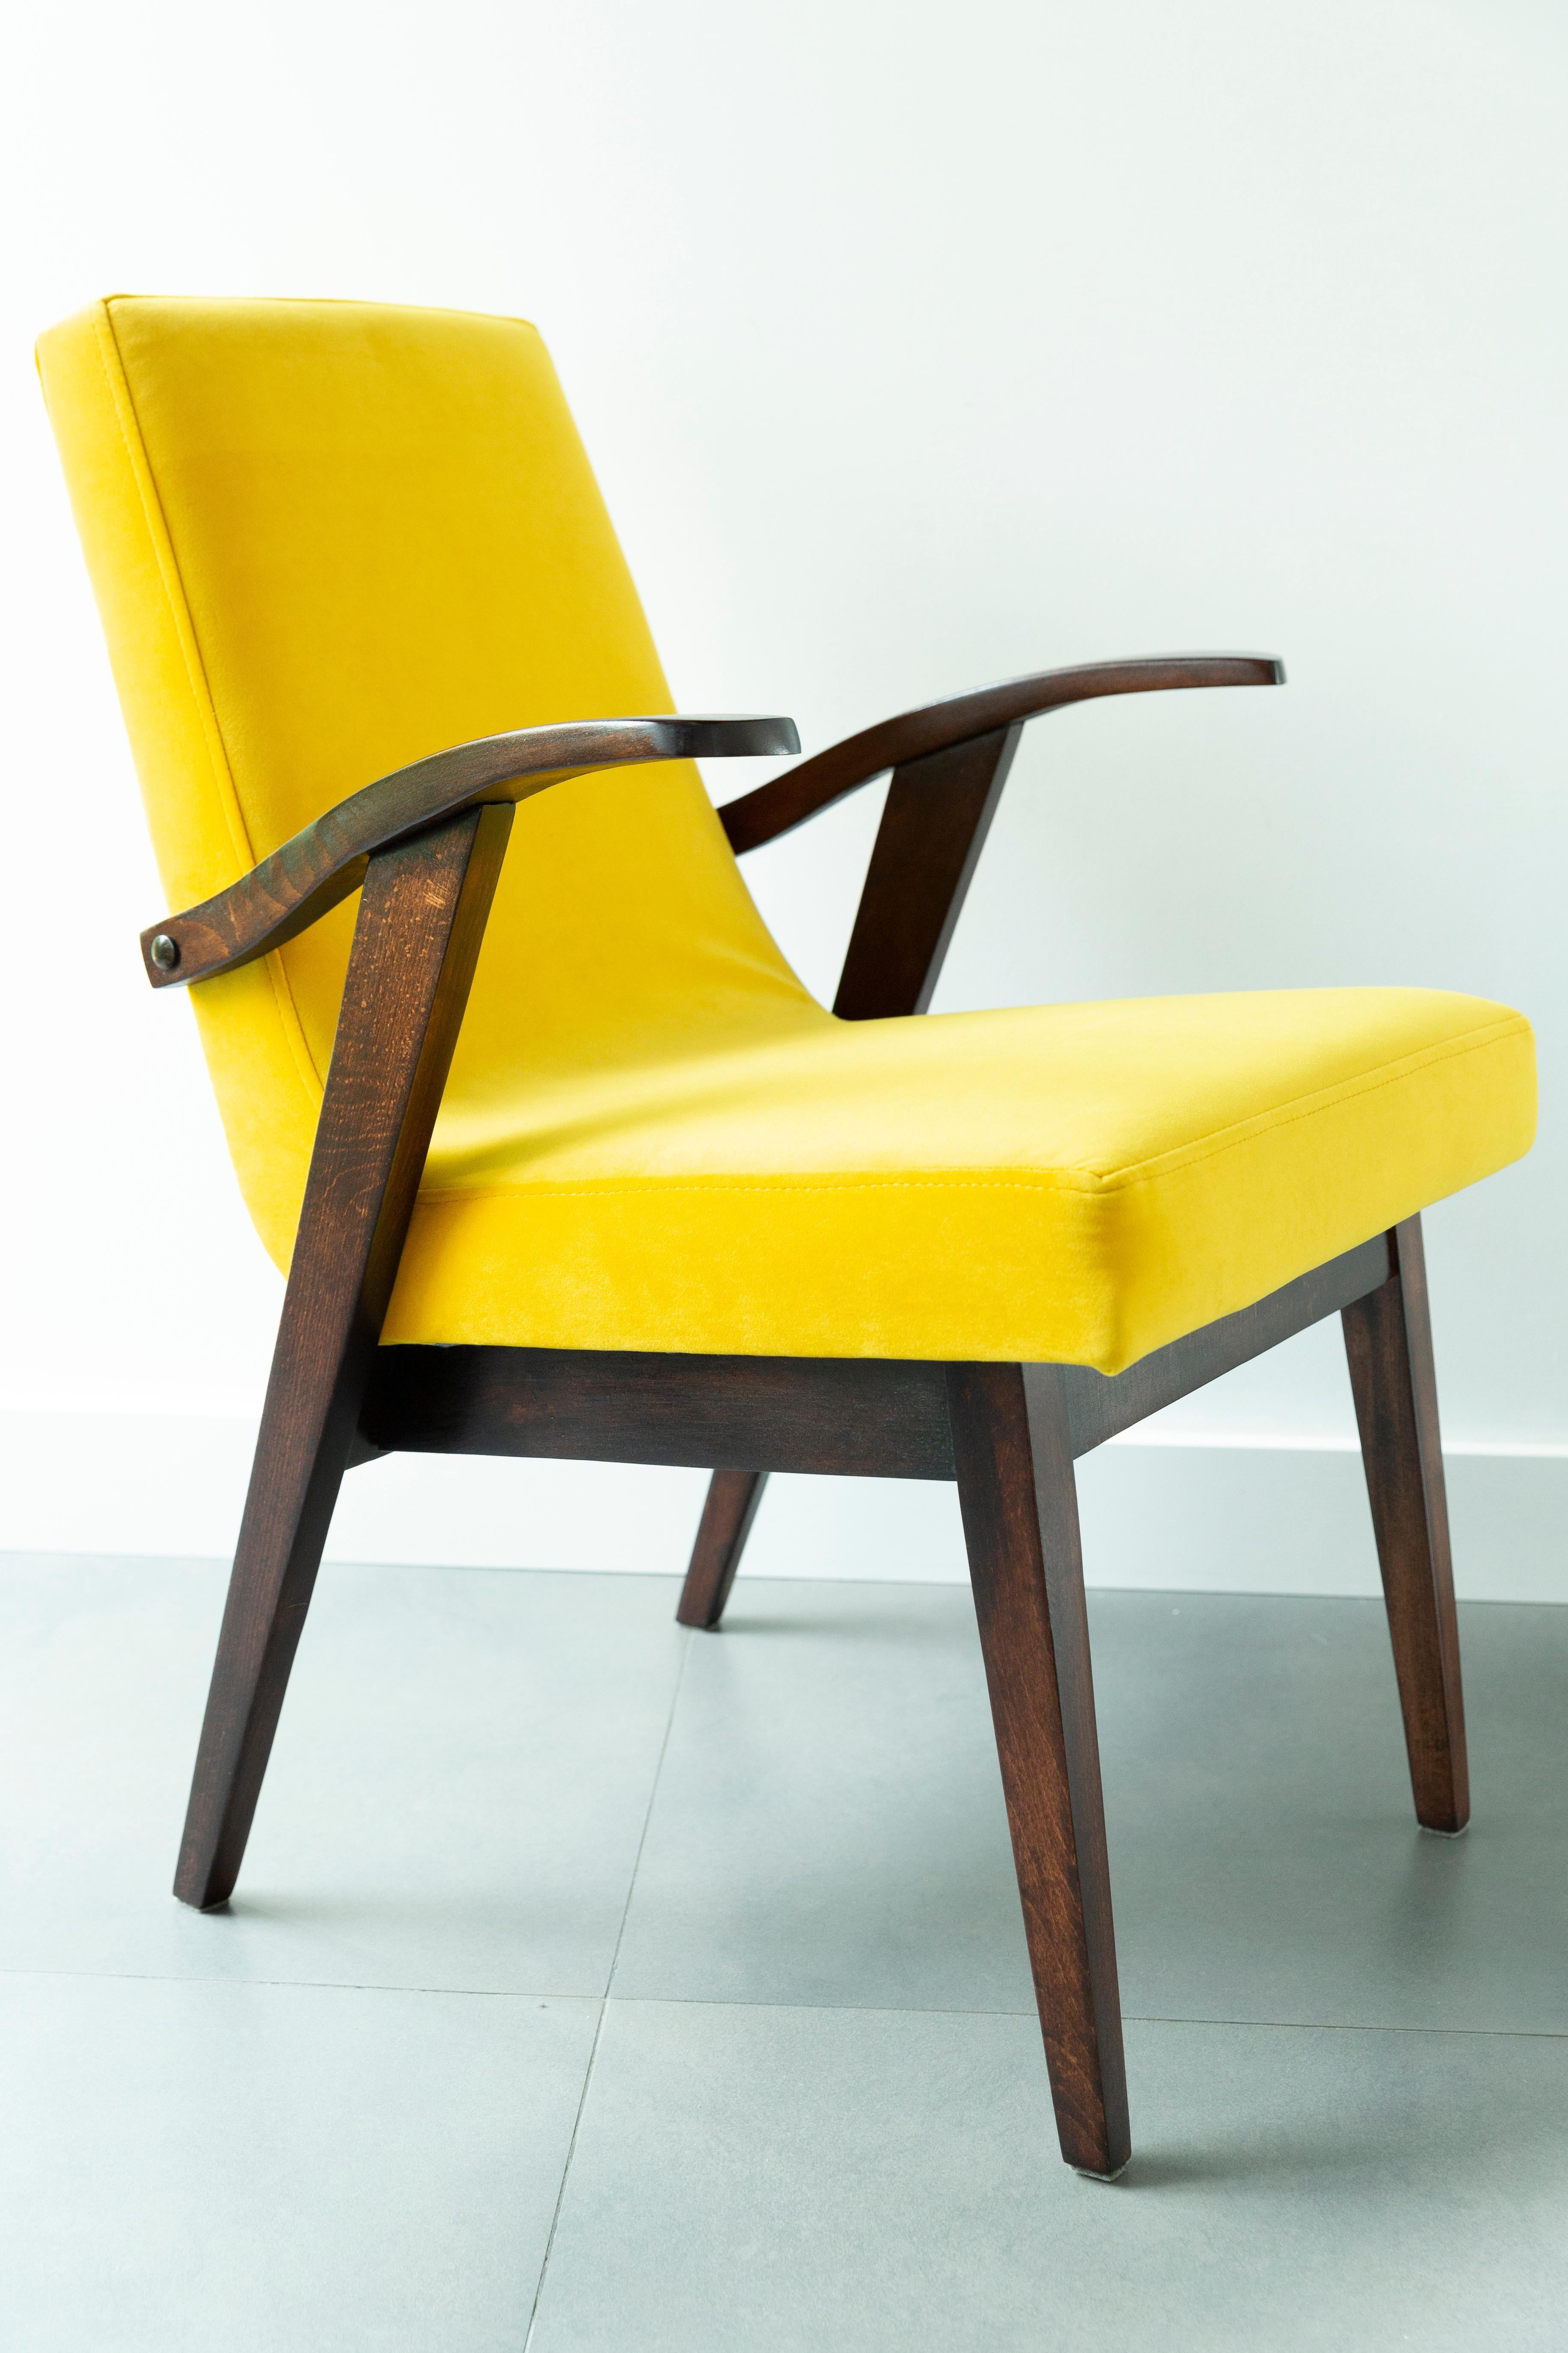 Polish 20th Century Vintage Yellow Armchair by Mieczyslaw Puchala, 1960s For Sale